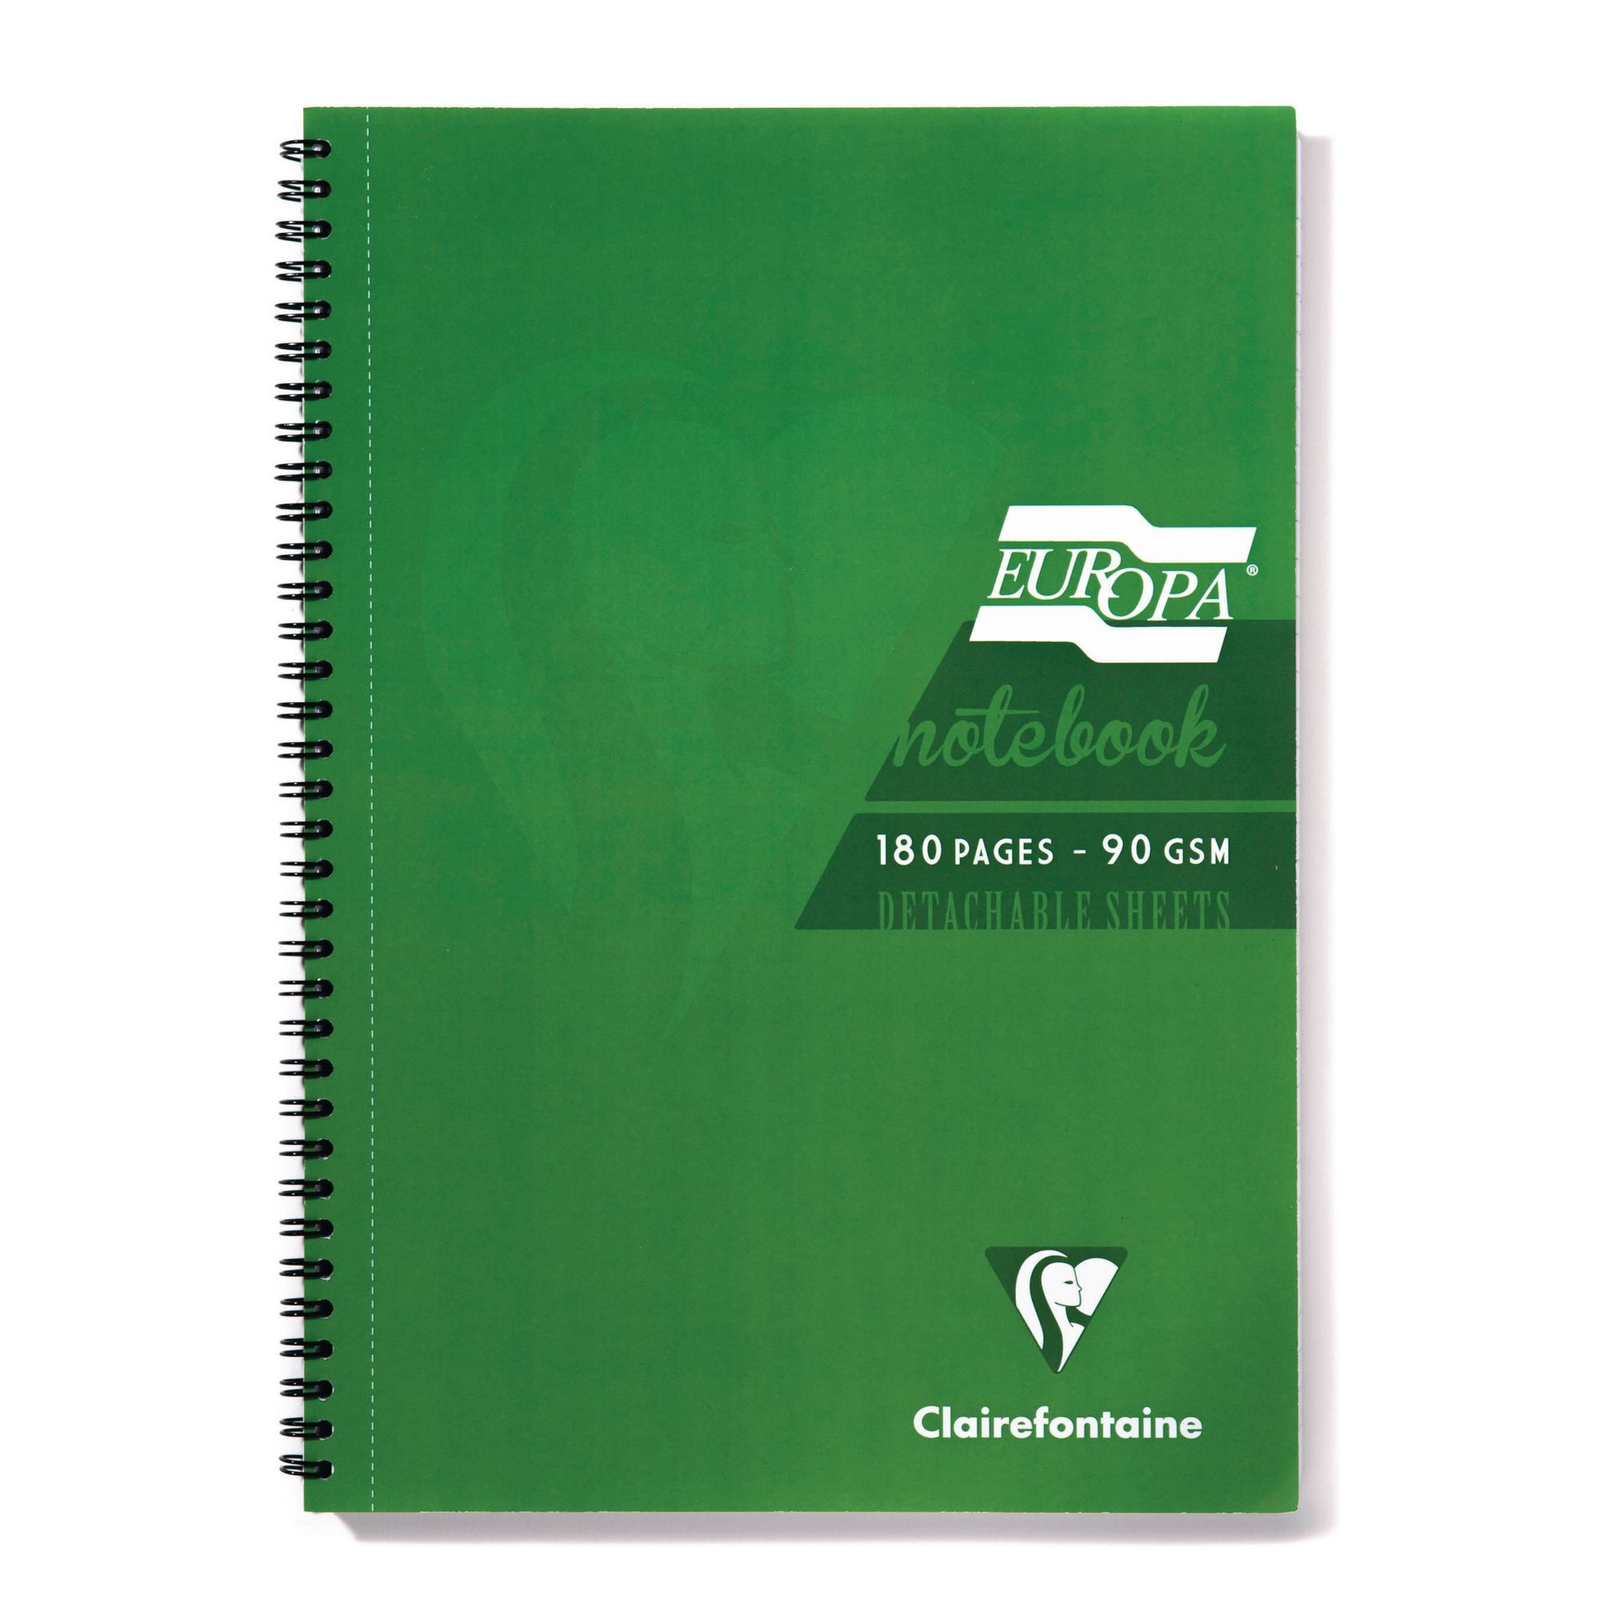 NEW Europa Note Book  - A4 Green